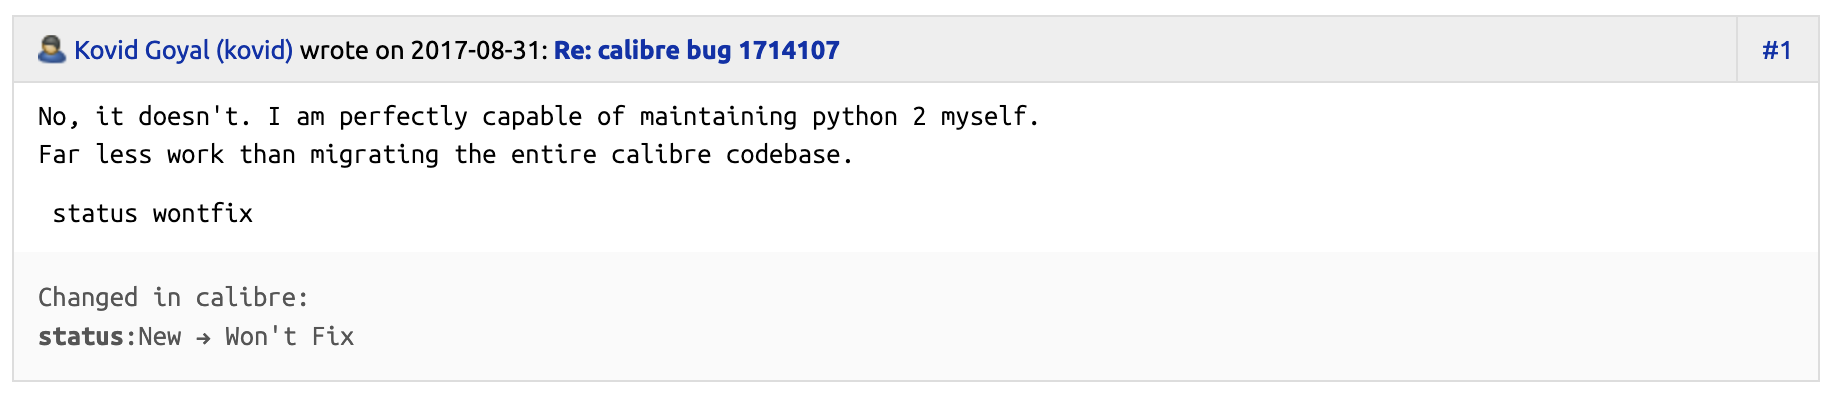 “I am perfectly capable of maintaining python 2 myself.”